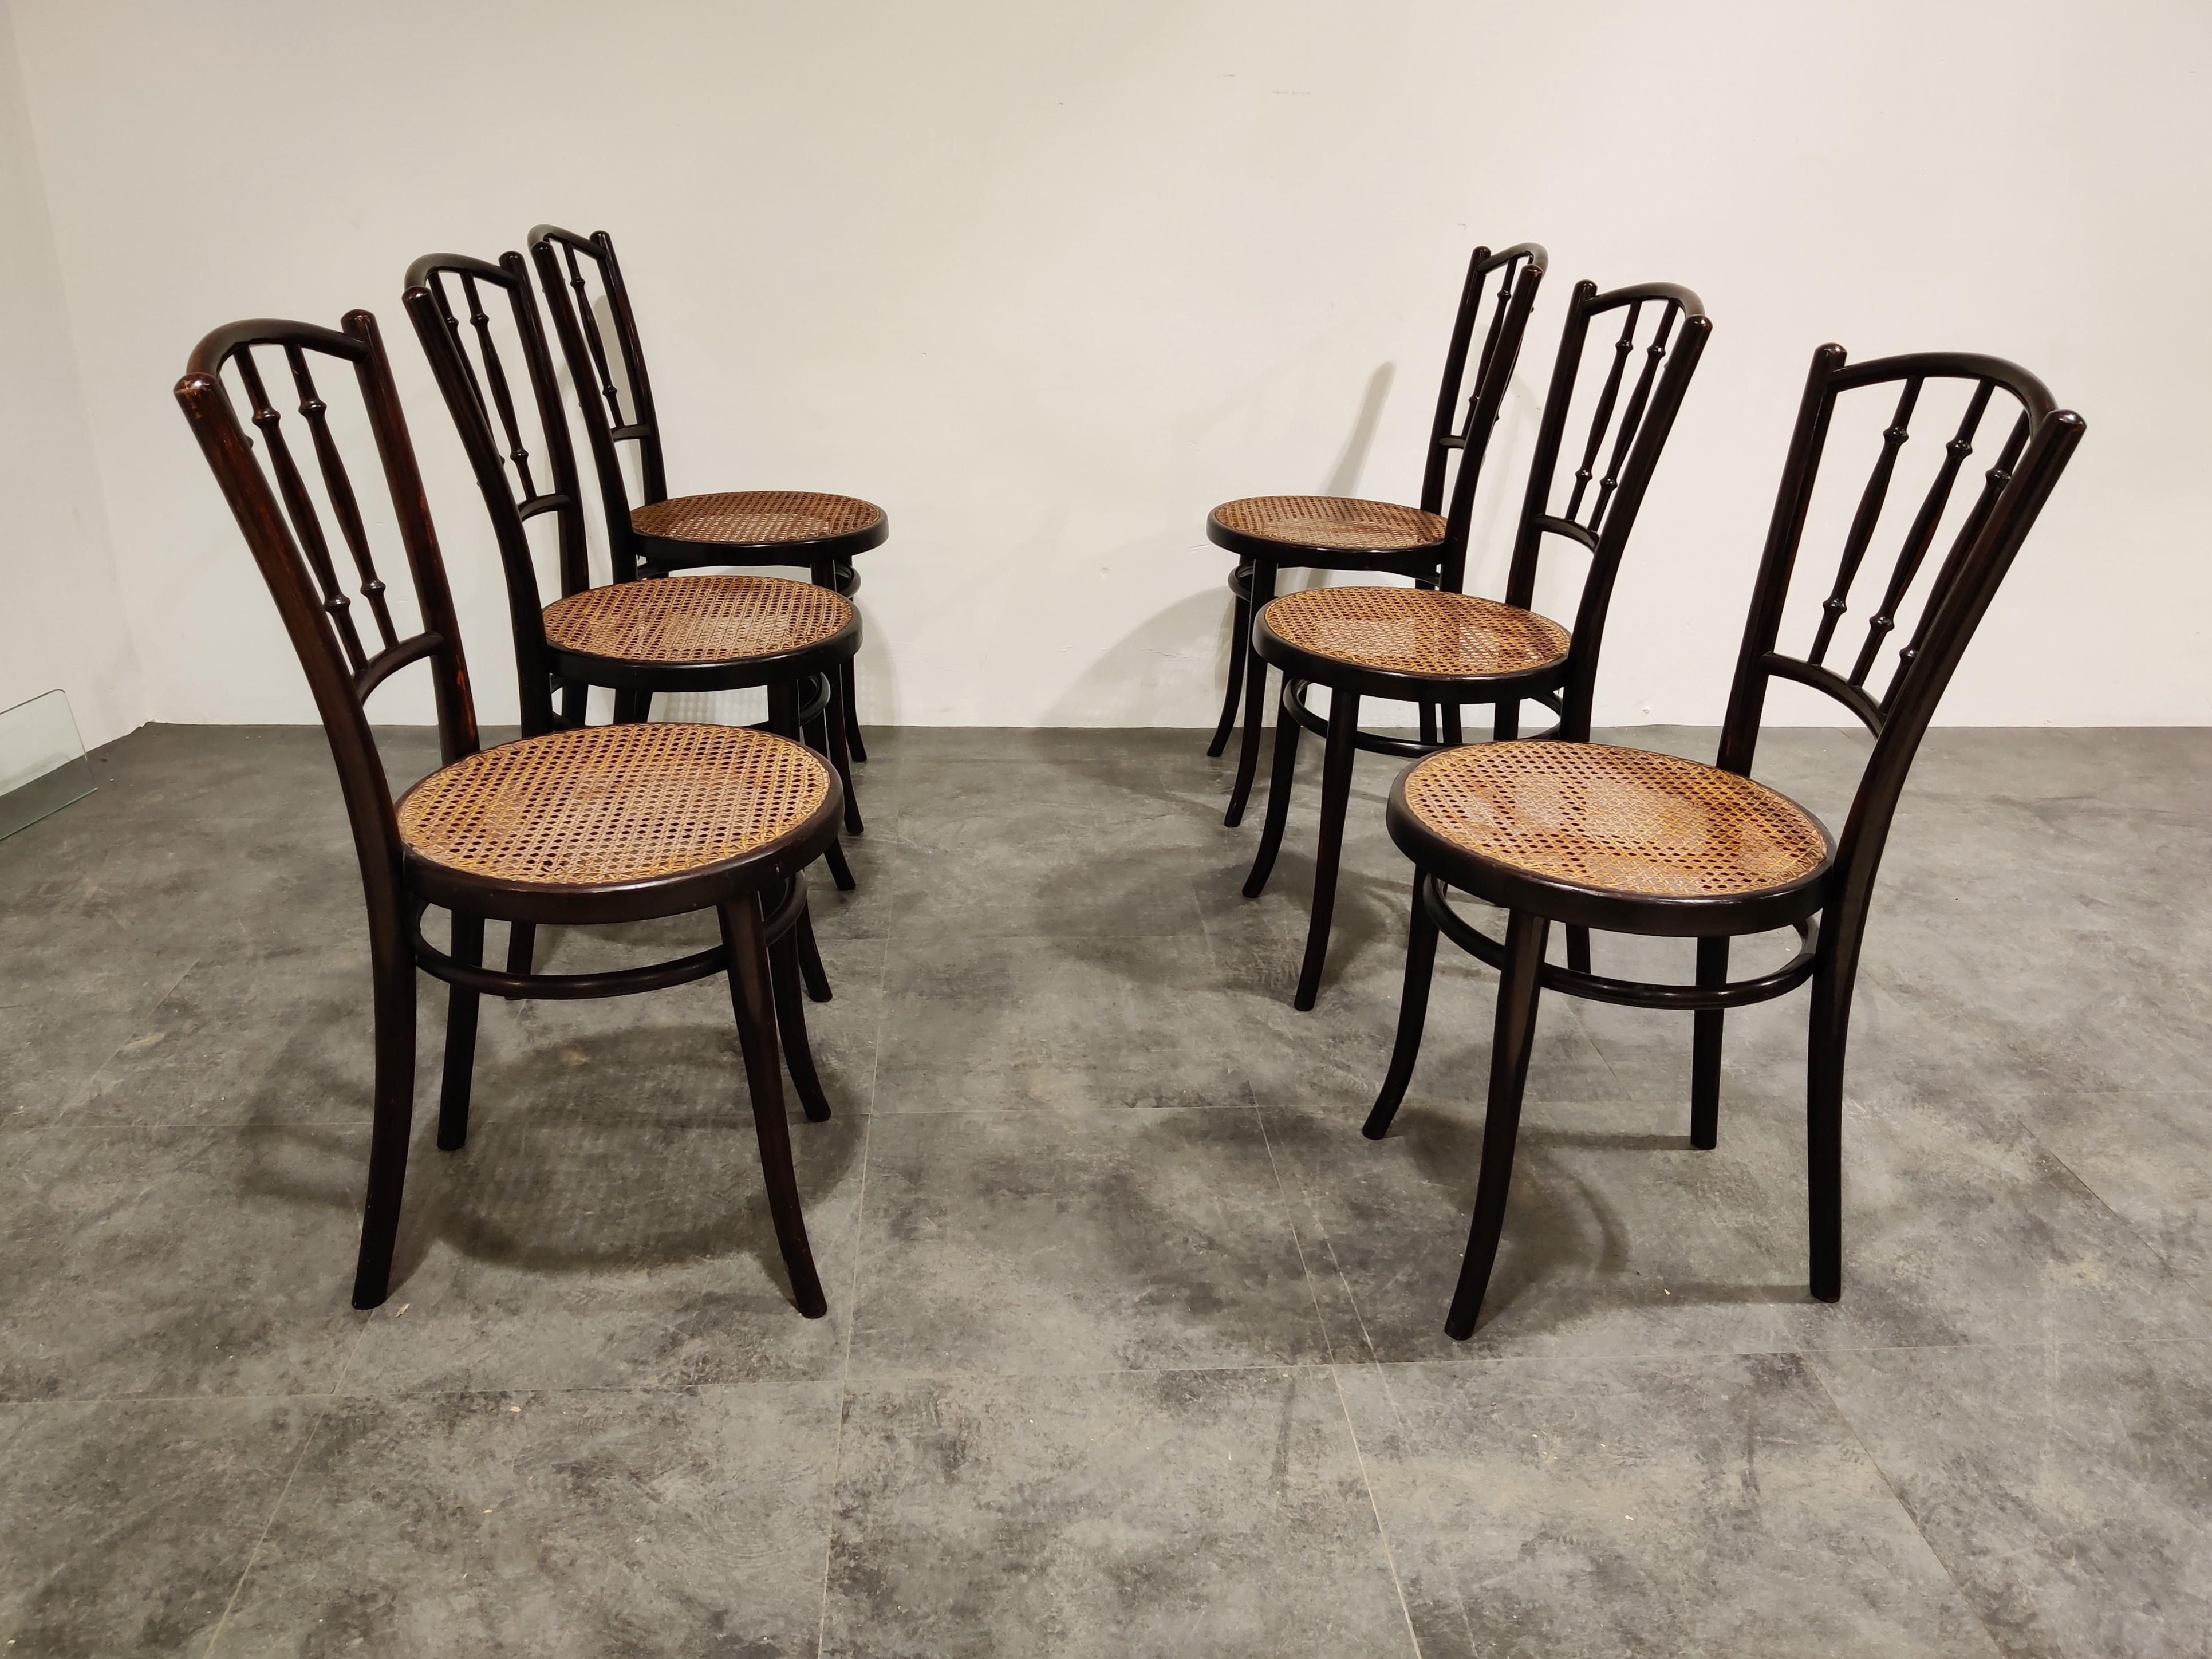 Set of 6 bentwood bistro chairs by Thonet, Vienna

These chairs were made in the early 20th century and most of them still have the original label and or stamp.

Rare to find a pair of intact Thonet chairs from that period. Original cane webbing